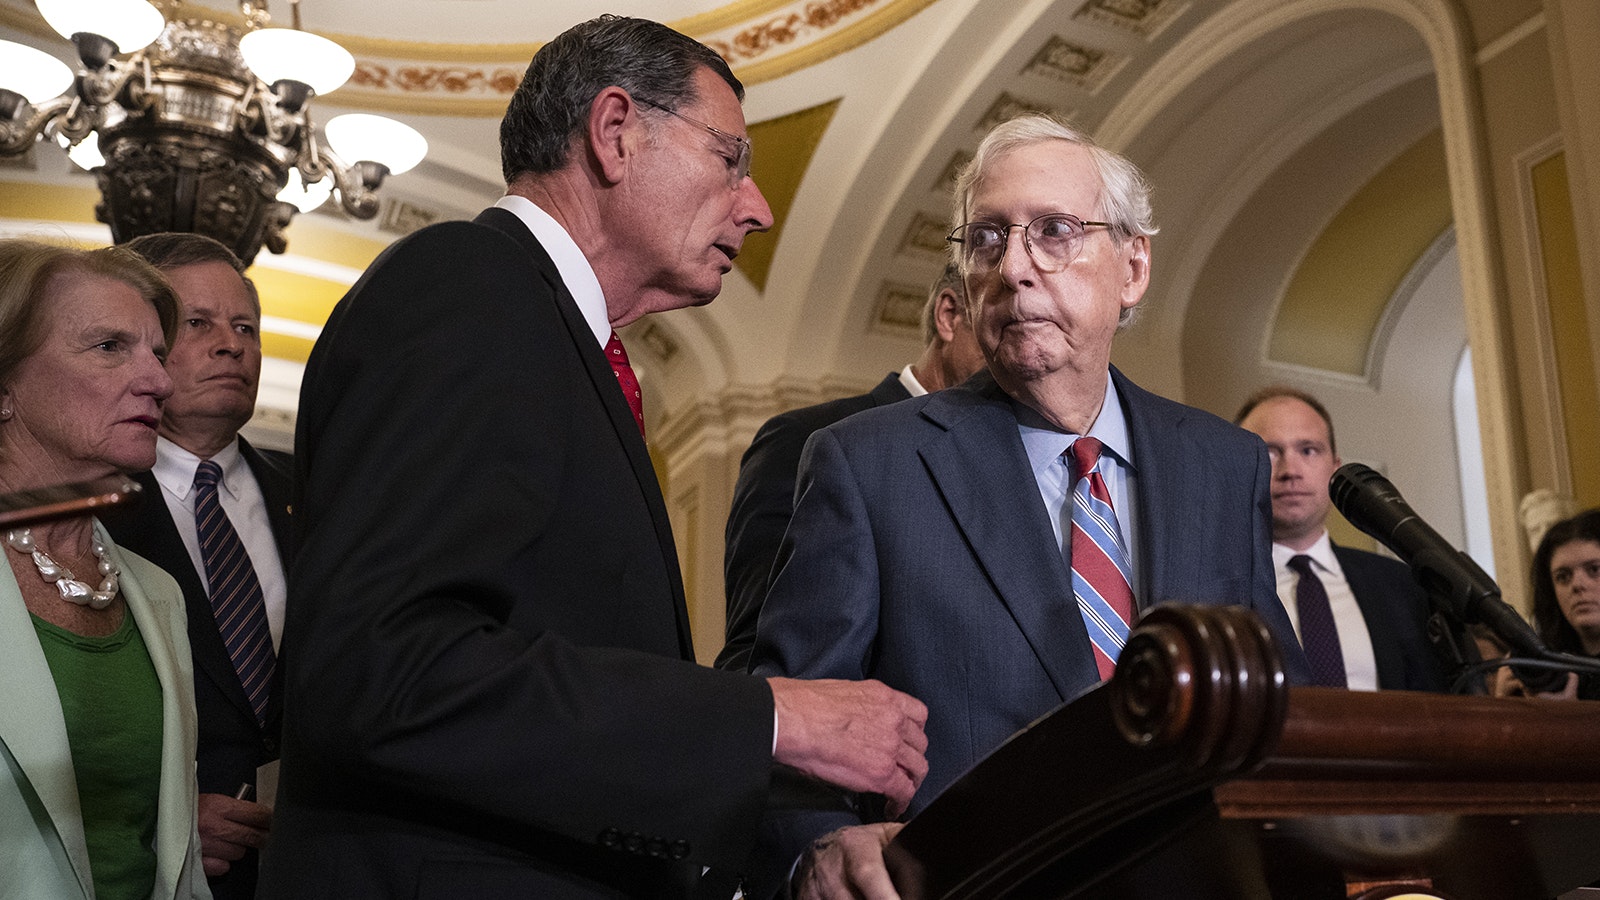 U.S. Sens. John Barrasso, R-Wyoming, left, and Mitch McConnell, R-Kentucky.